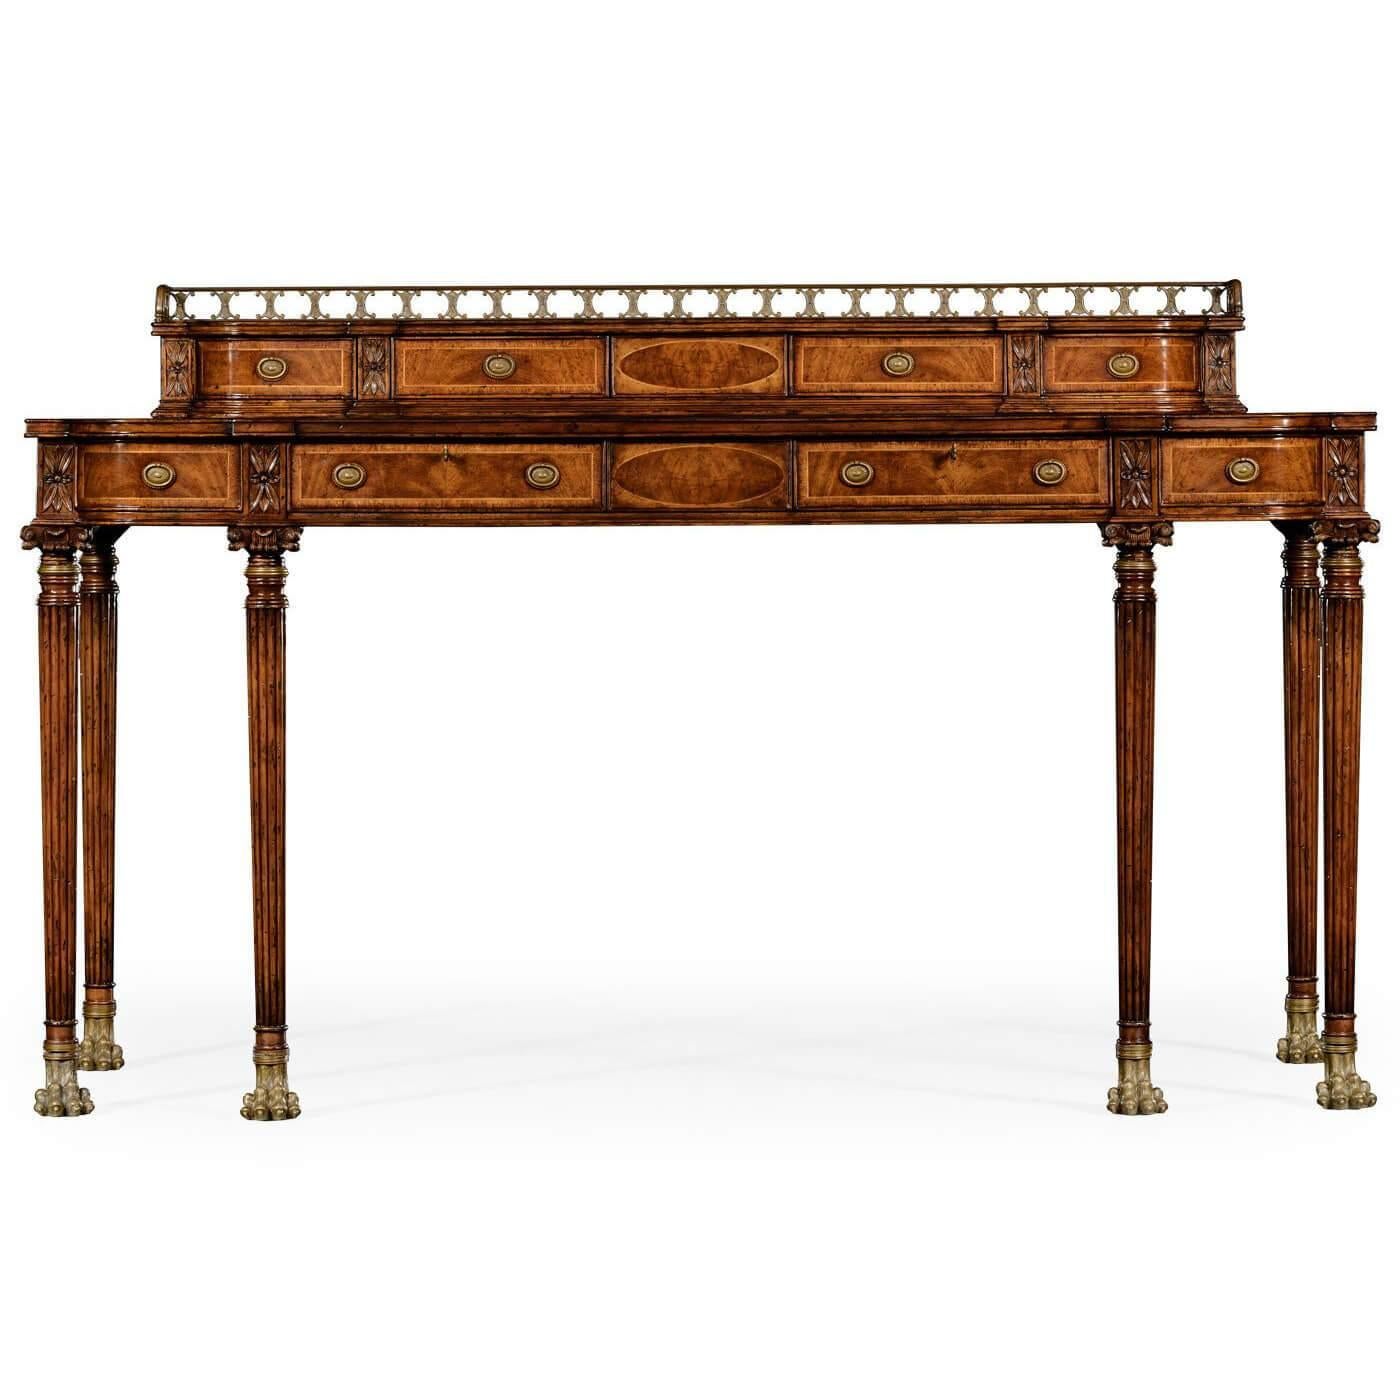 A large Regency style mahogany cross banded console server with a recessed upper section crowned with a finely pierced brass gallery, the bow fronted lower section with four shallow drawers and reeded legs with carved capitals and naturalistic brass